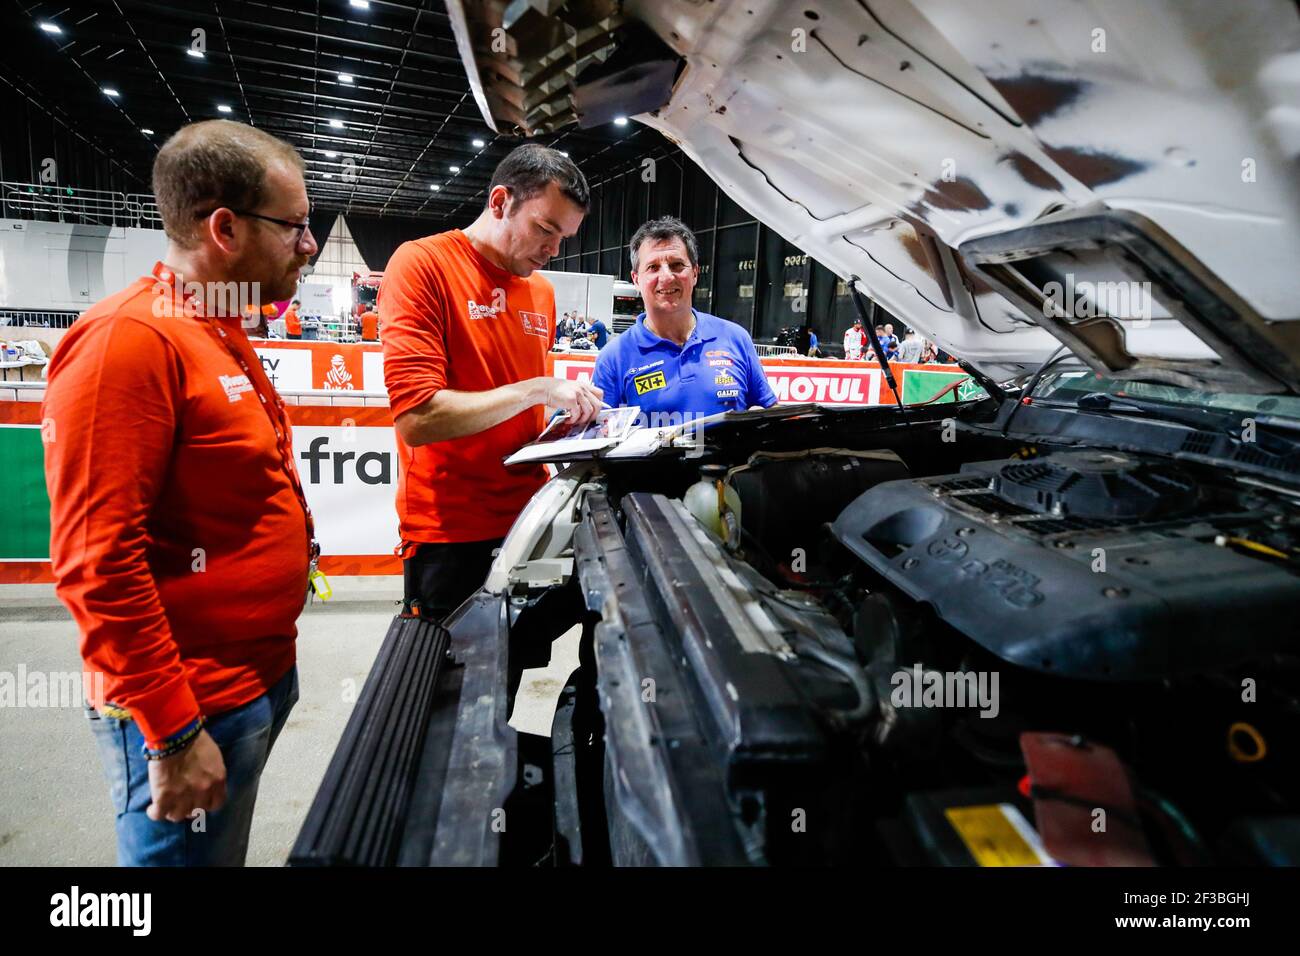 386 Piana Marco (fra), Alcaraz William (fra), Toyota, Xtremeplus Polaris Factory Team, Auto, Car, ambiance during the Dakar 2020's Administrative and Technical scrutineering in Jeddah, Saudi Arabia from January 2 to 4, 2020 - Photo Florent Gooden / DPPI Stock Photo